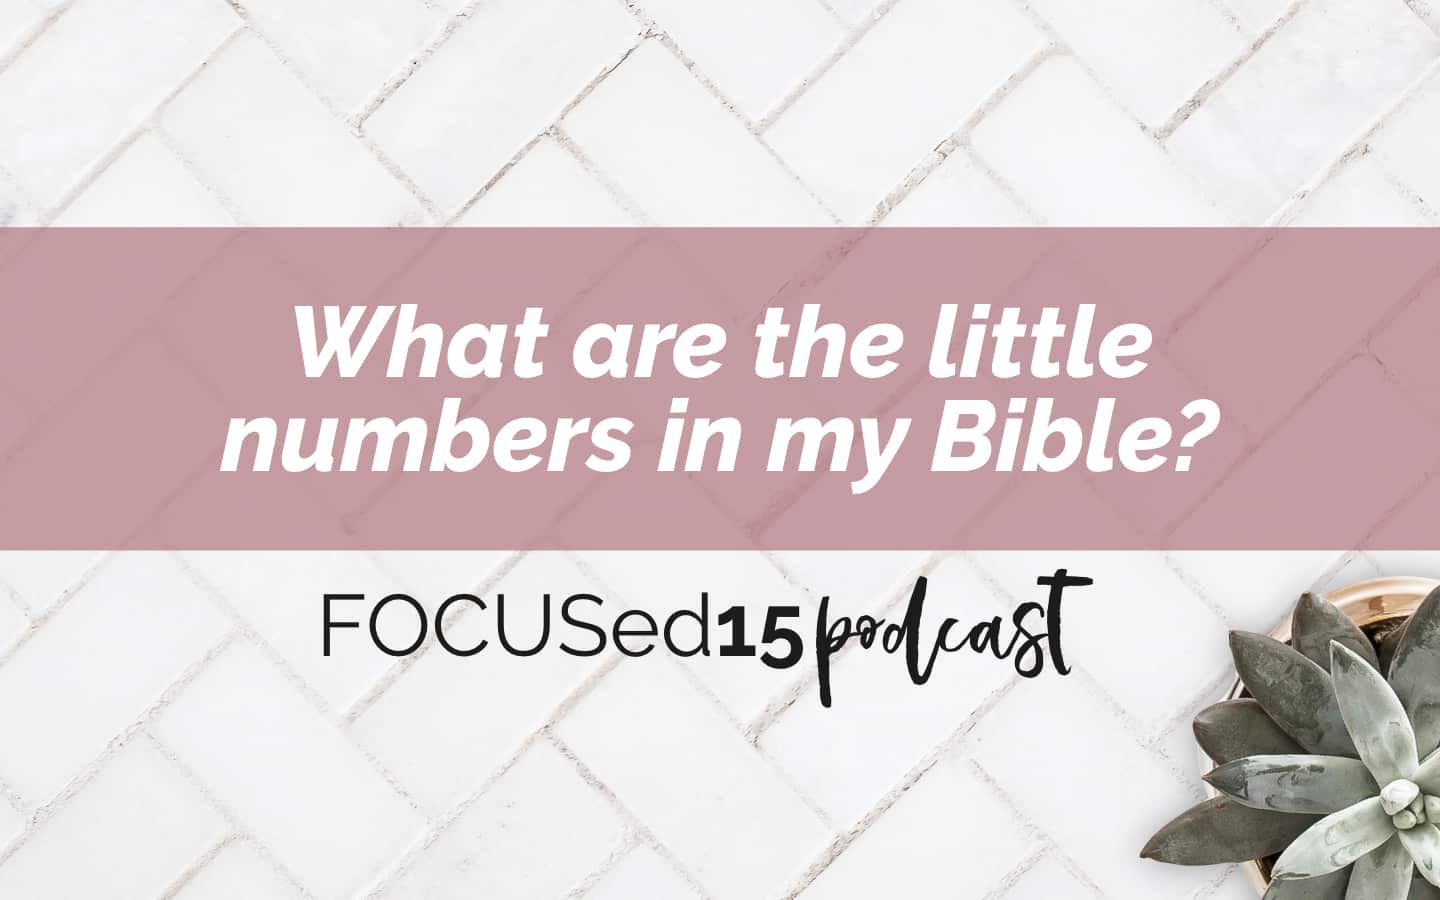 What are the little numbers in my Bible?